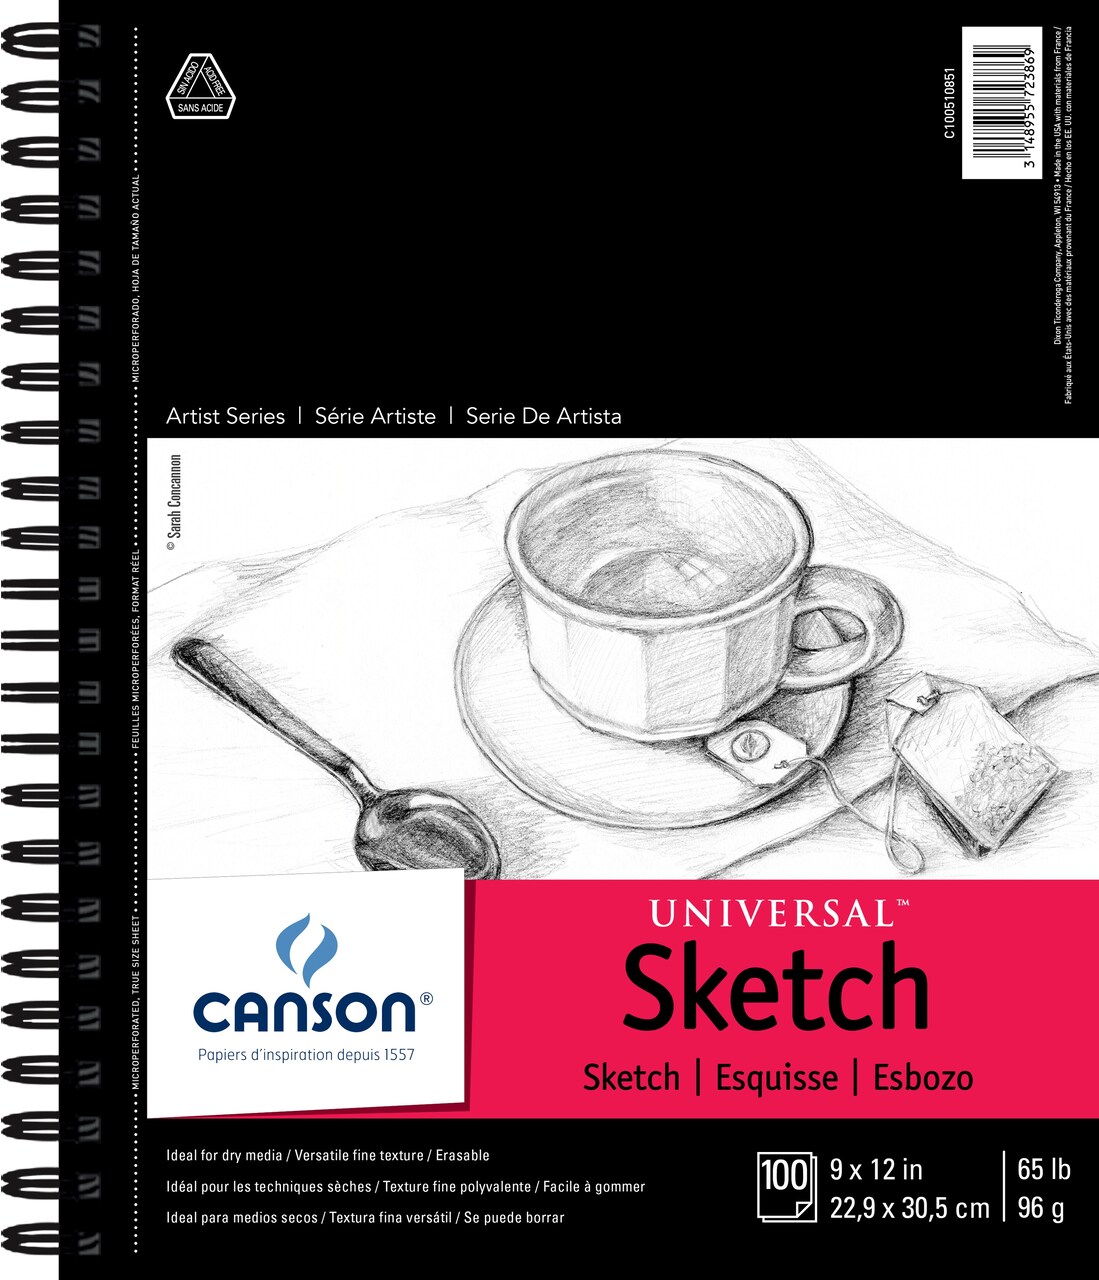 Canson Universal Spiral Sketch Book 9X12-100 Sheets